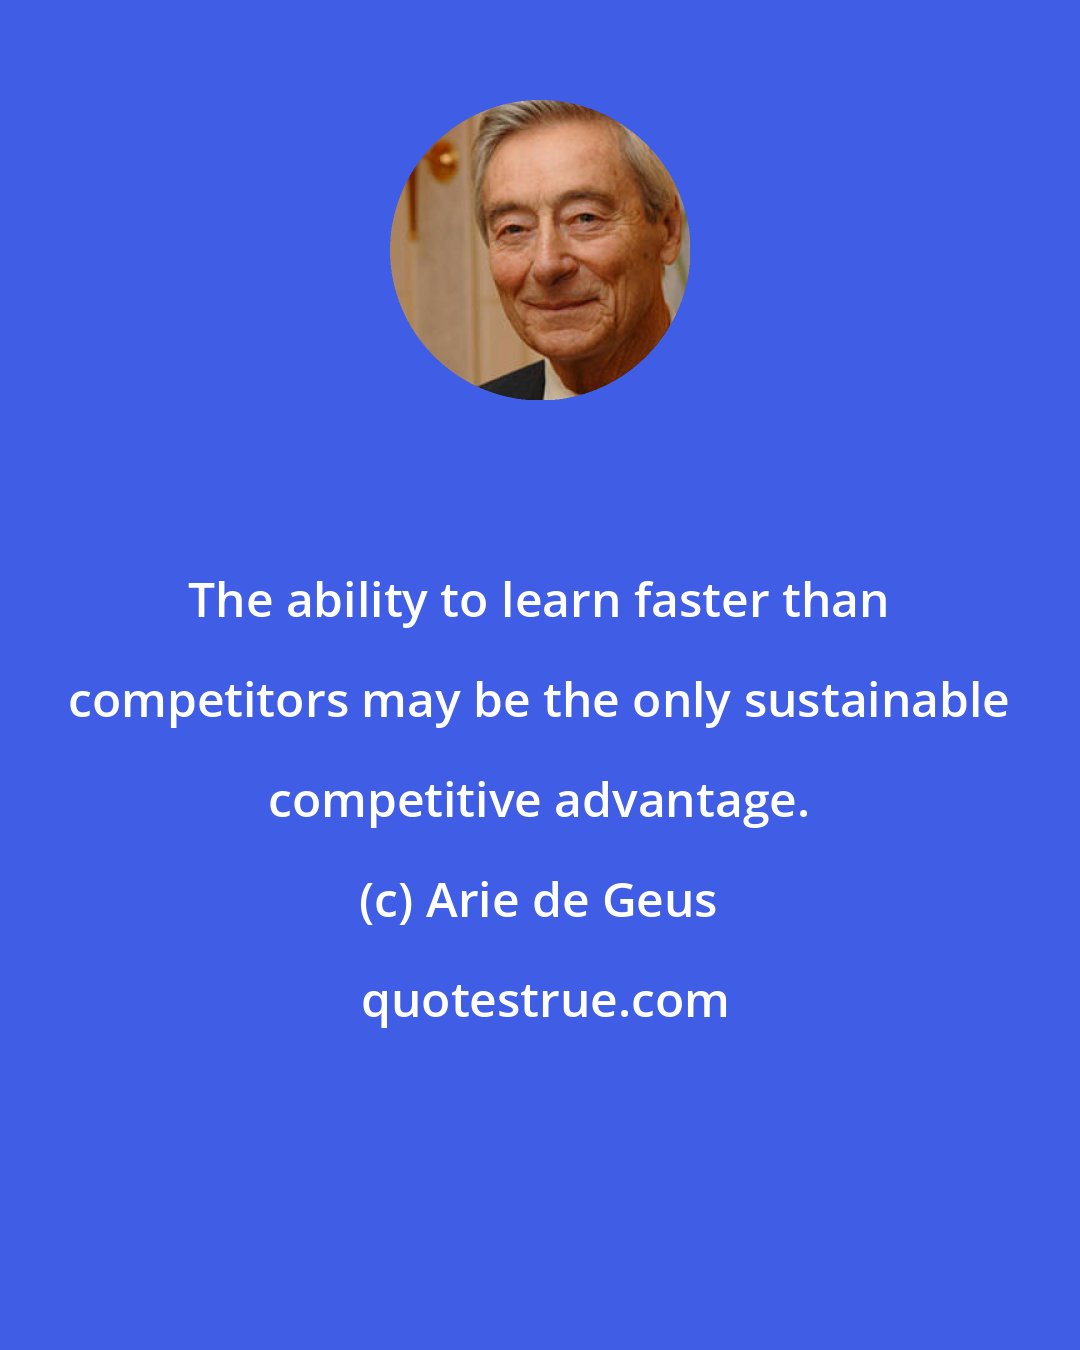 Arie de Geus: The ability to learn faster than competitors may be the only sustainable competitive advantage.